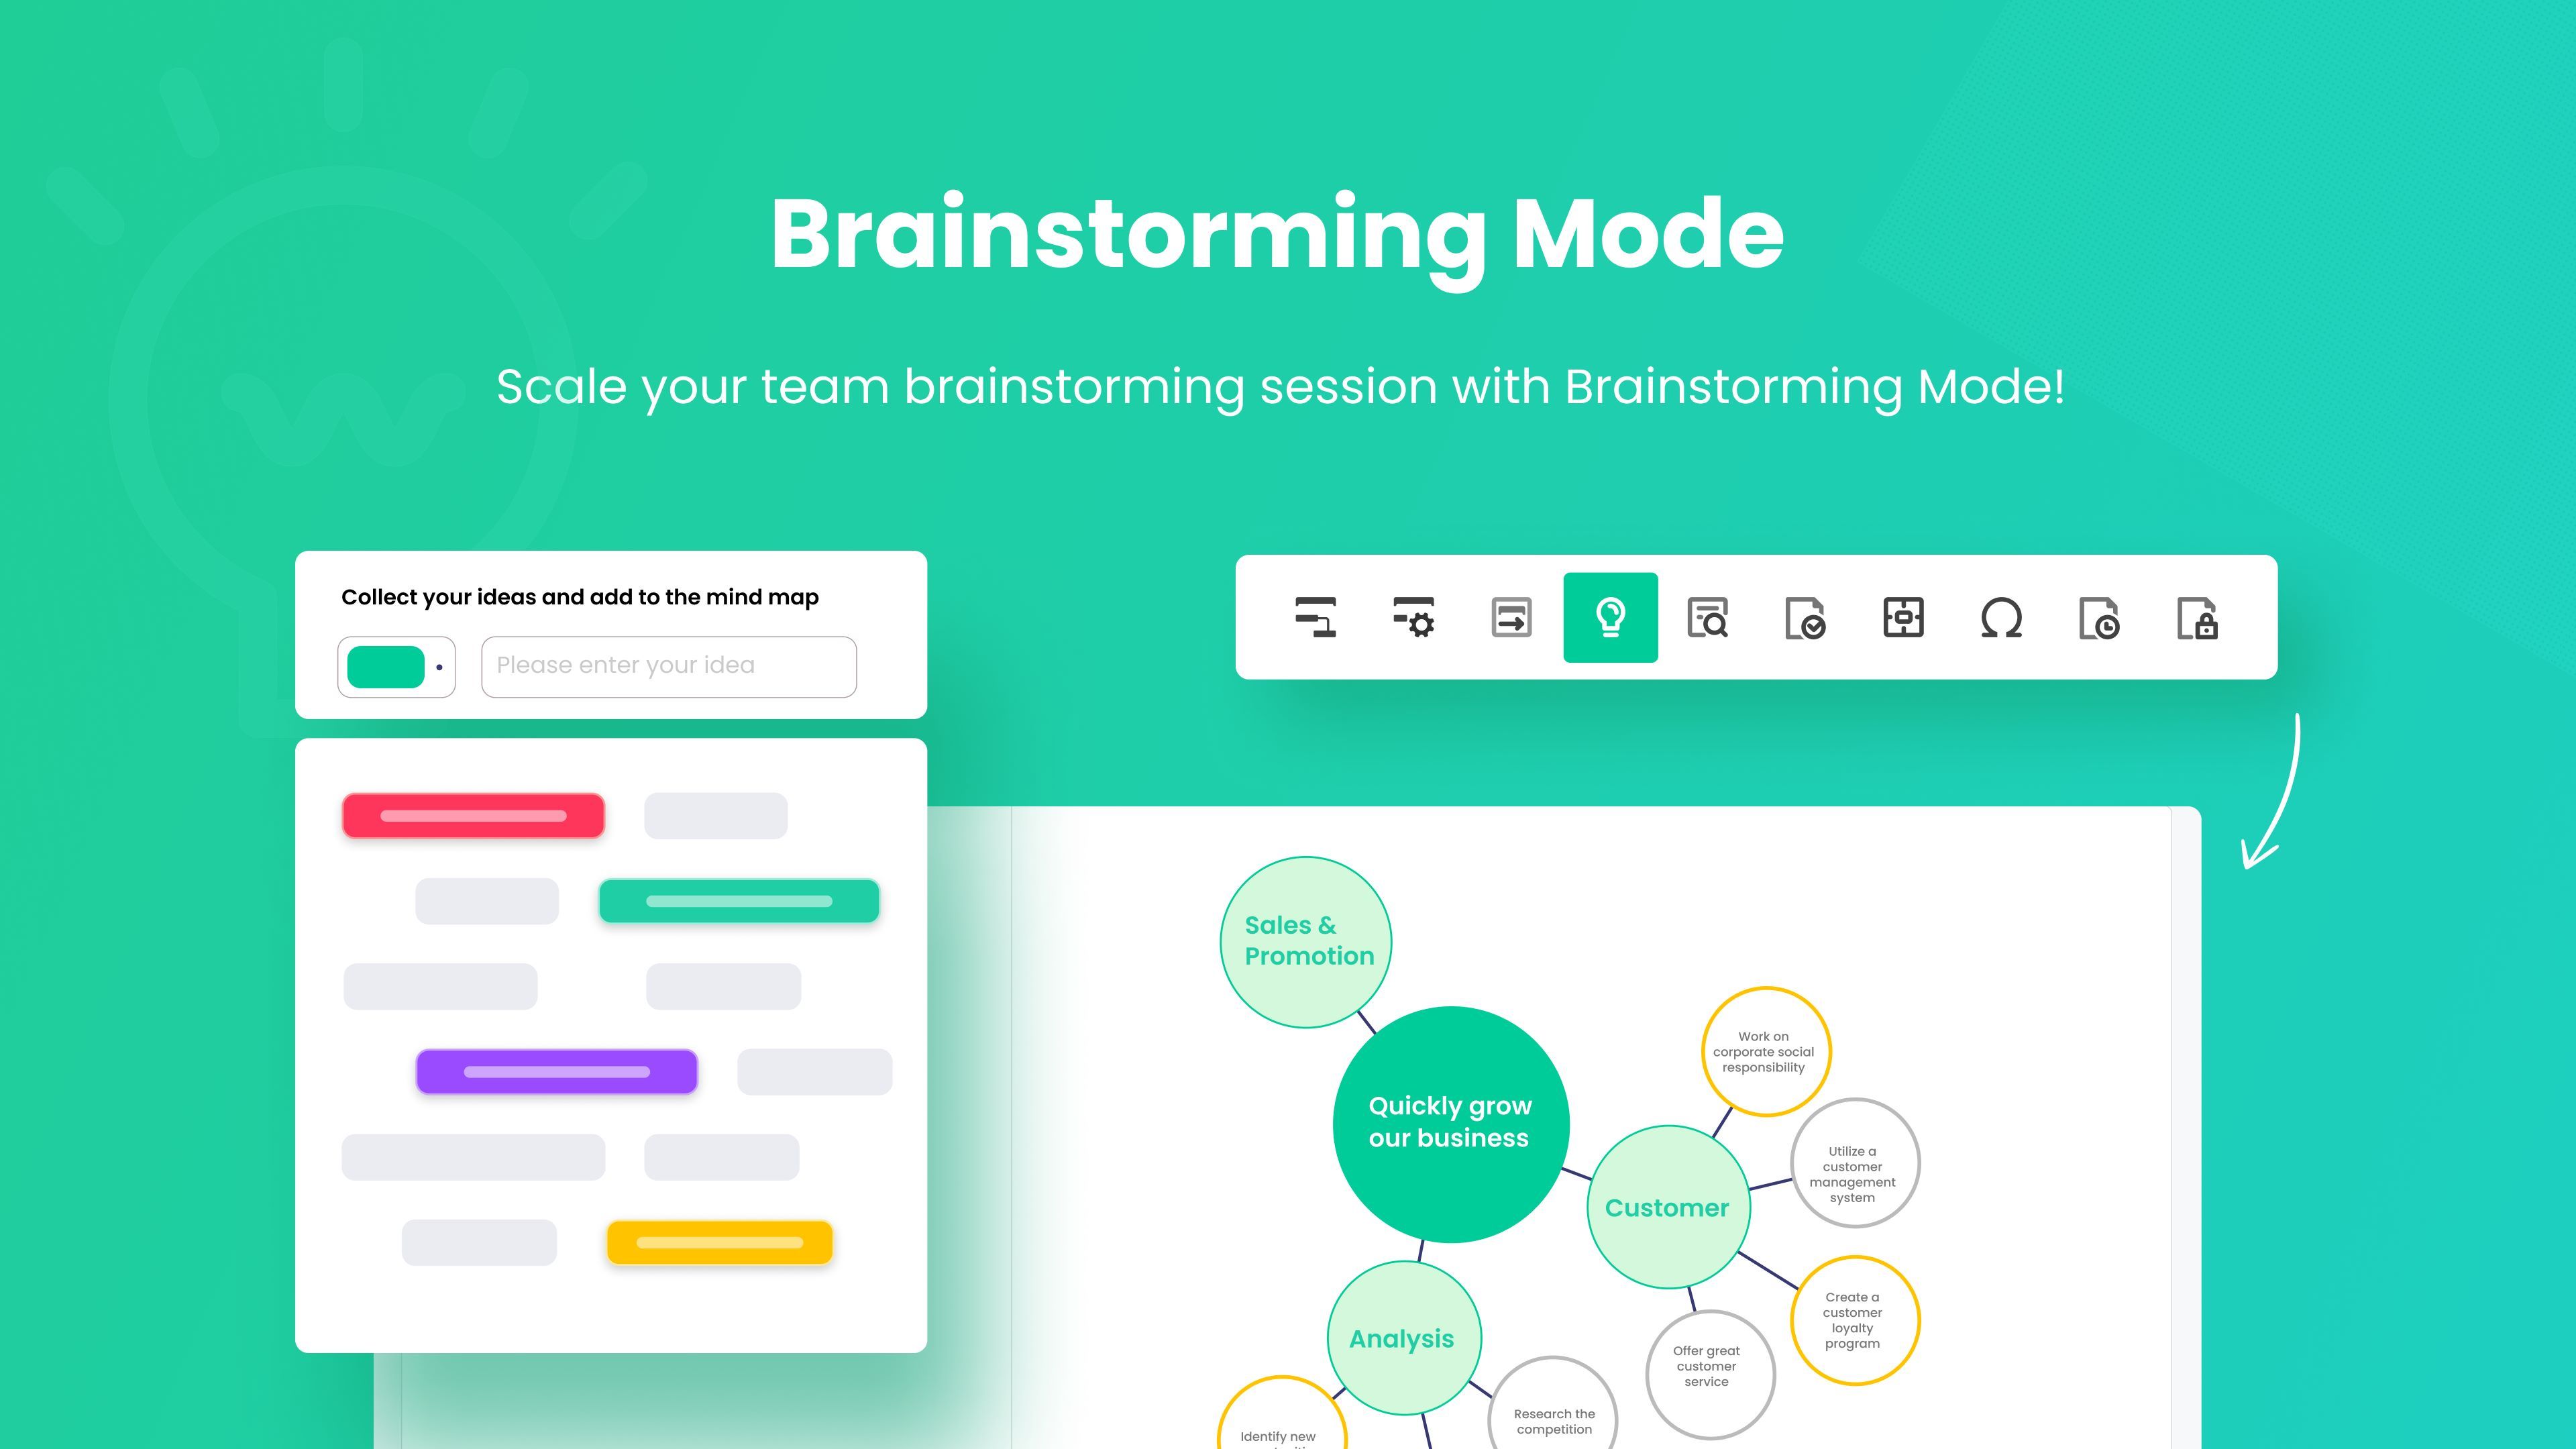 Wondershare EdrawMind - Mind Mapping and Brainstorming